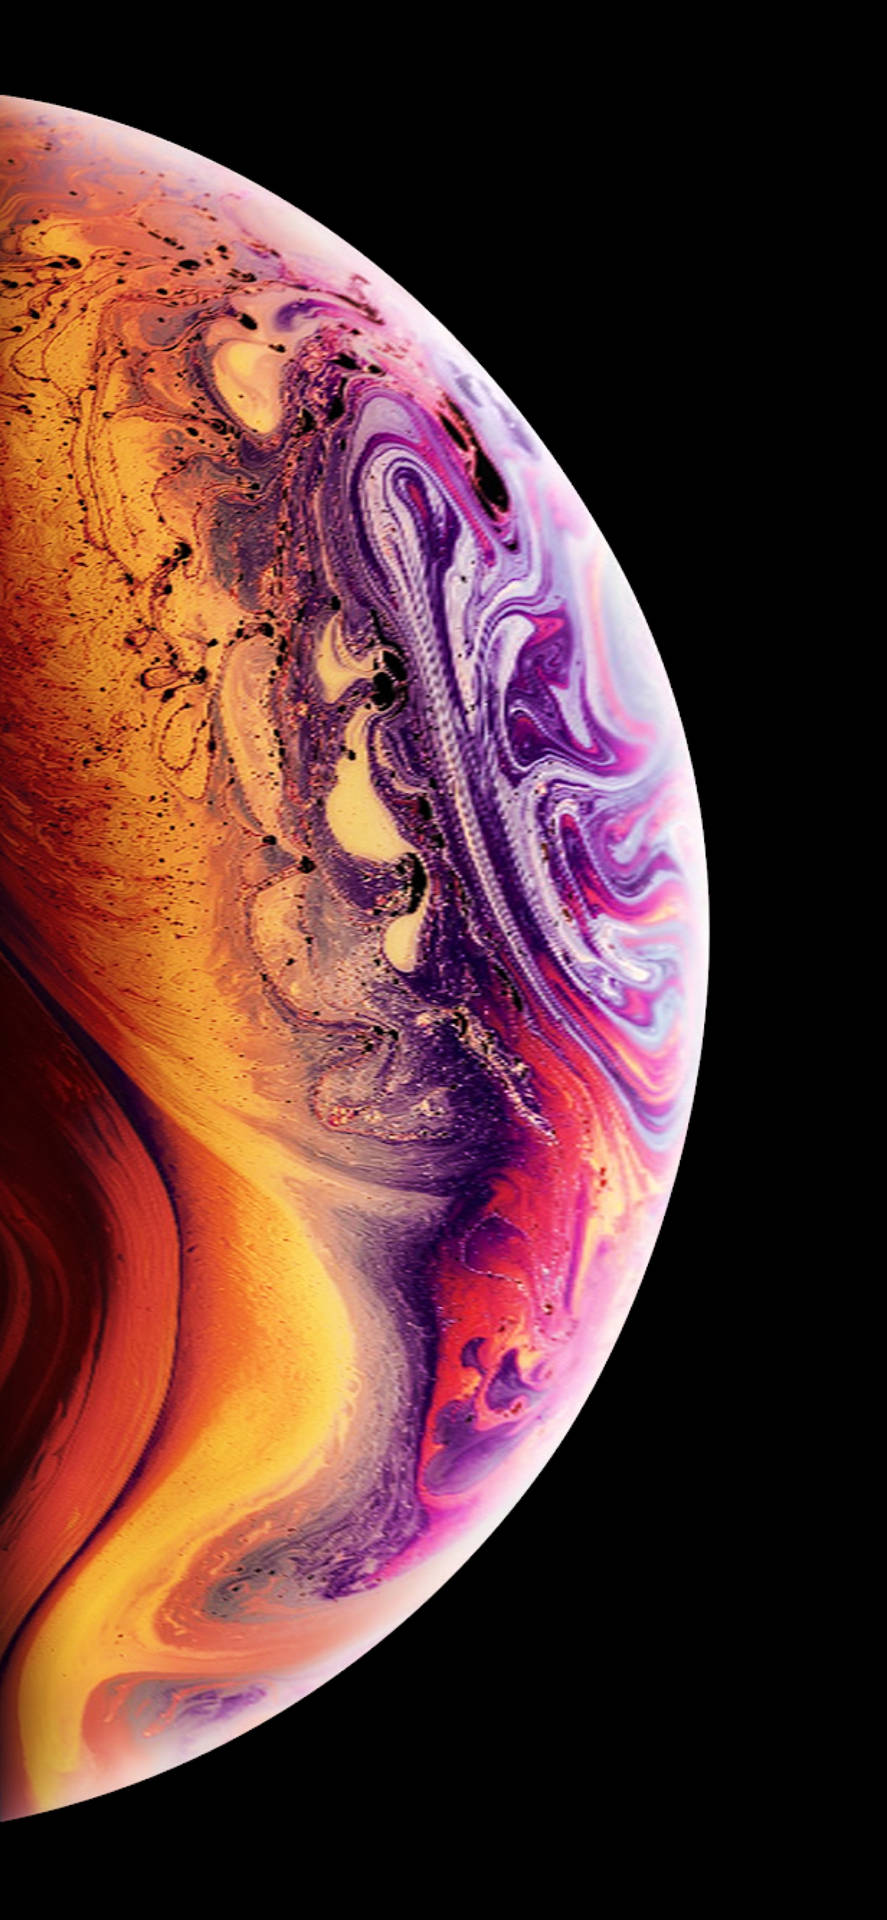 Showcase your style with the iPhone X and XS Max Wallpaper